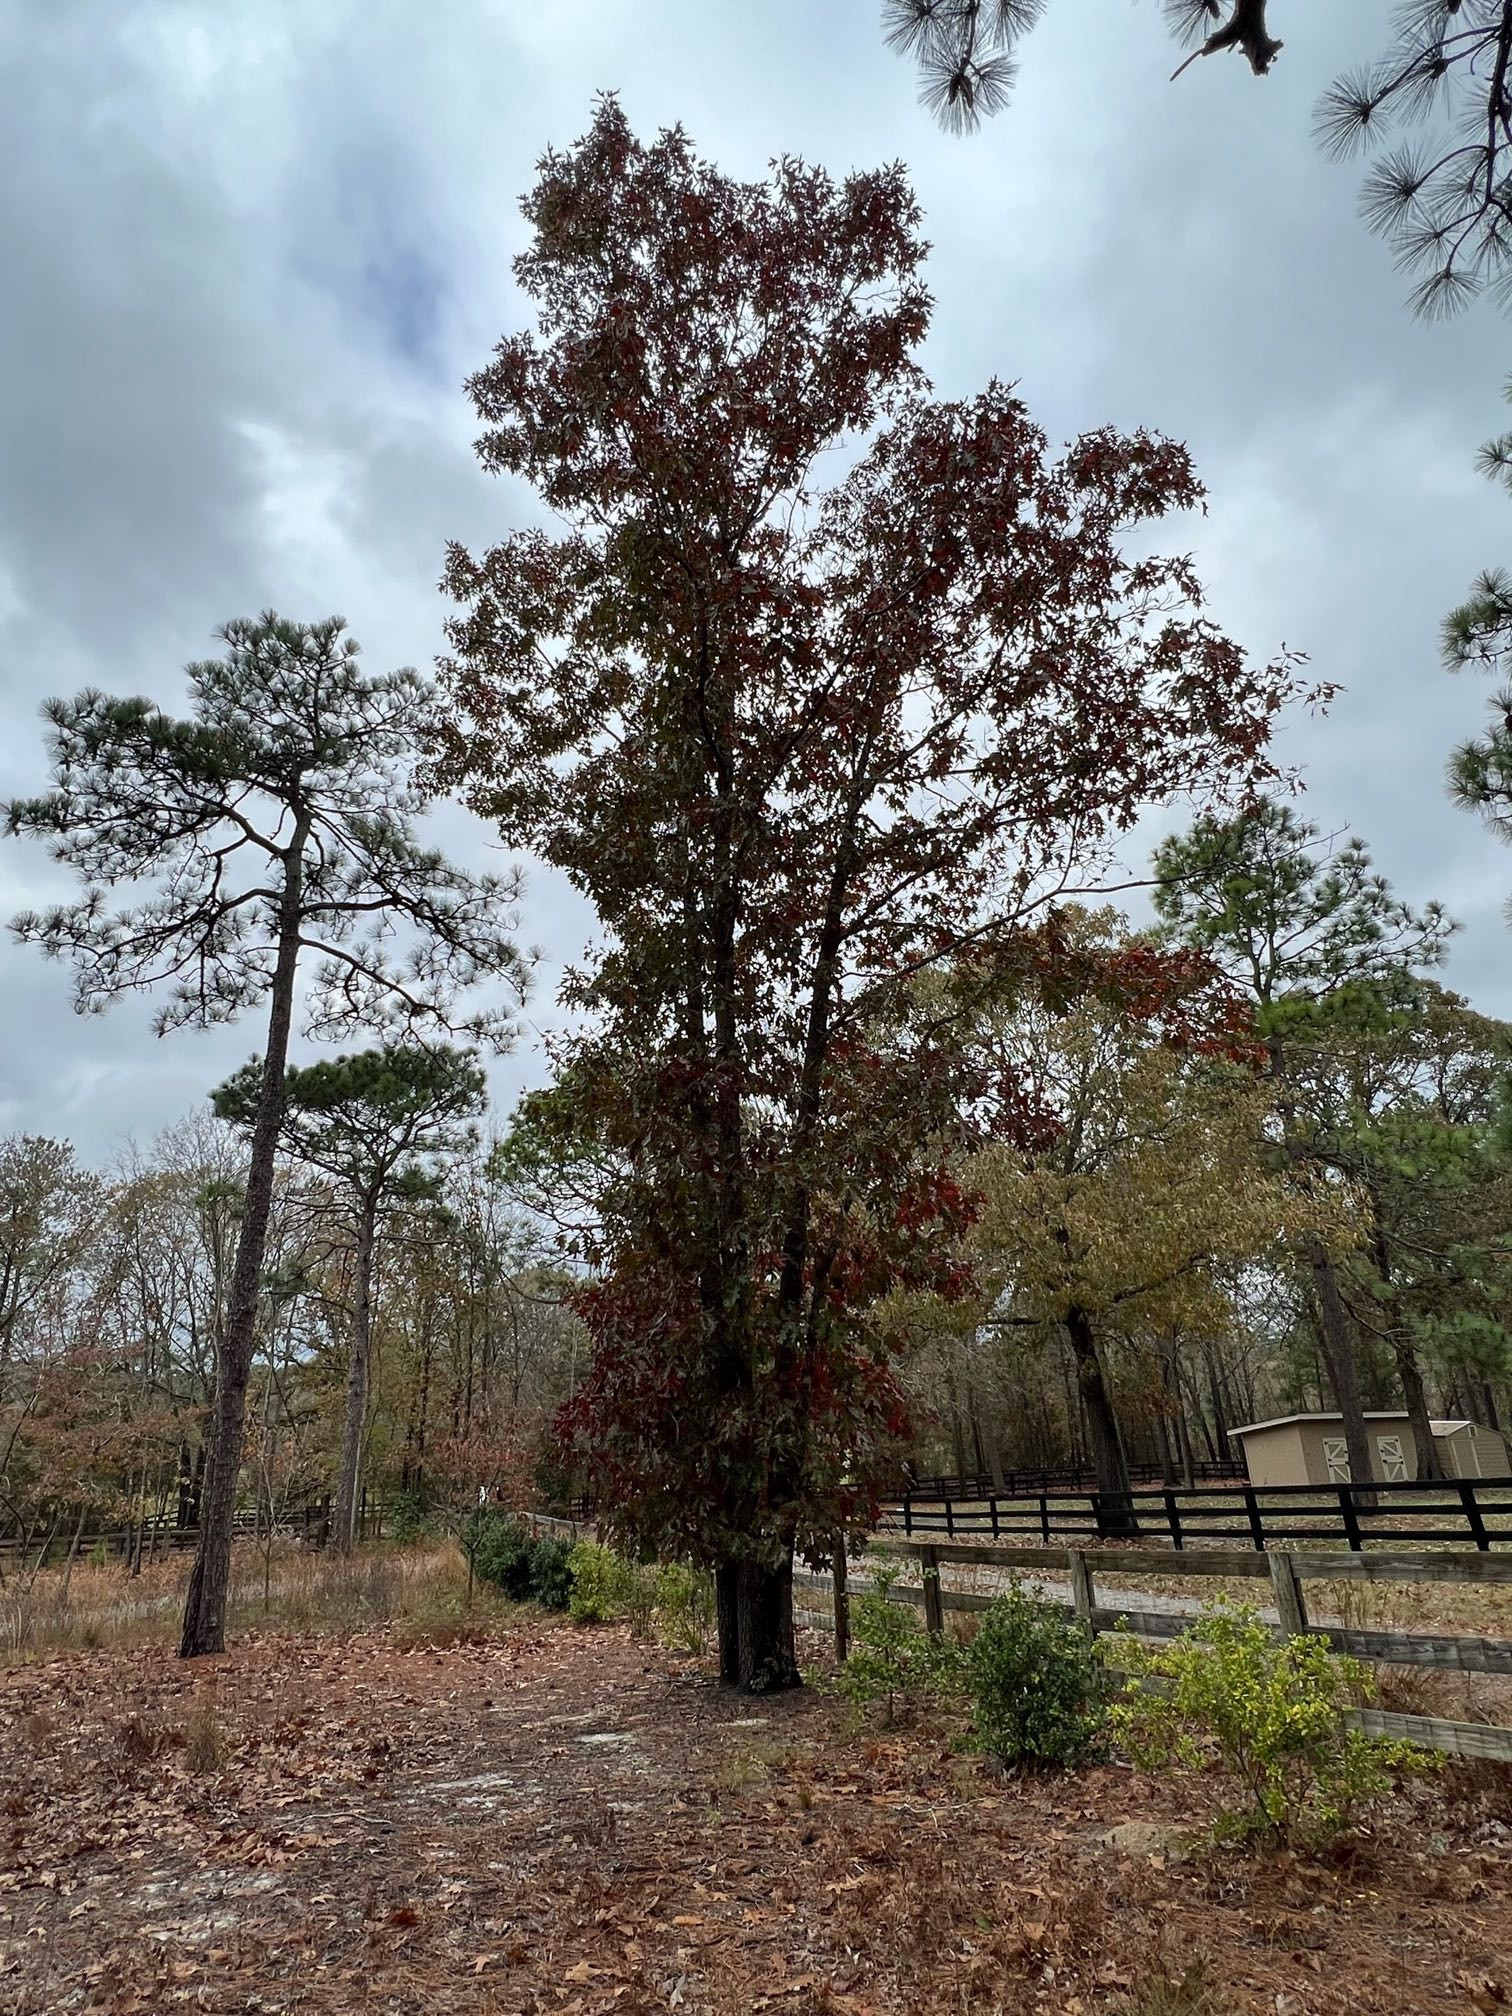 The Scientific Name is Quercus rubra. You will likely hear them called Northern Red Oak. This picture shows the Large tree of eastern half of the US. of Quercus rubra